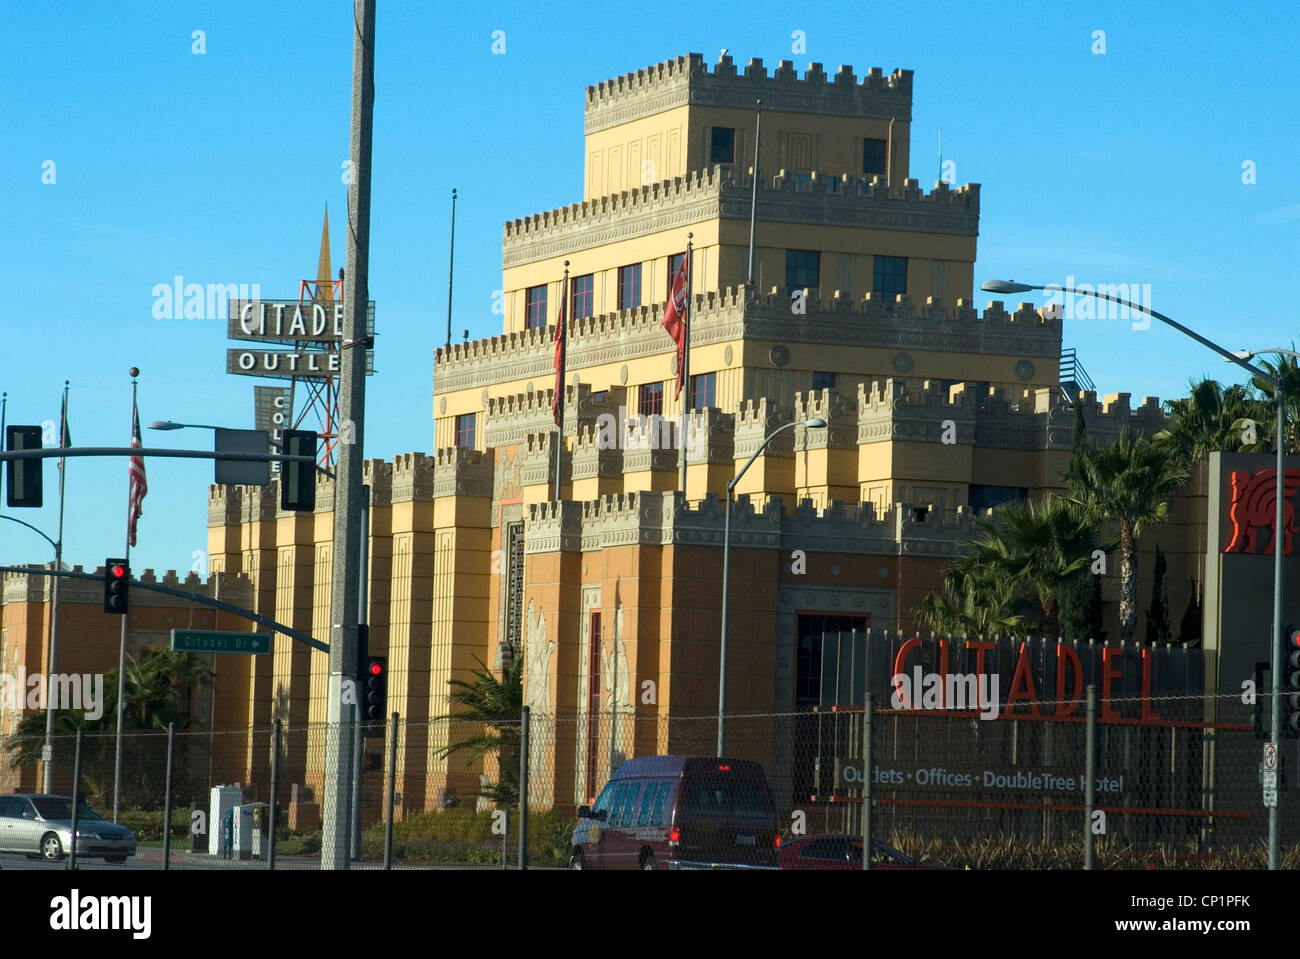 The Citadel Outlet Mall, Los Angeles Stock Photo: 47982807 - Alamy